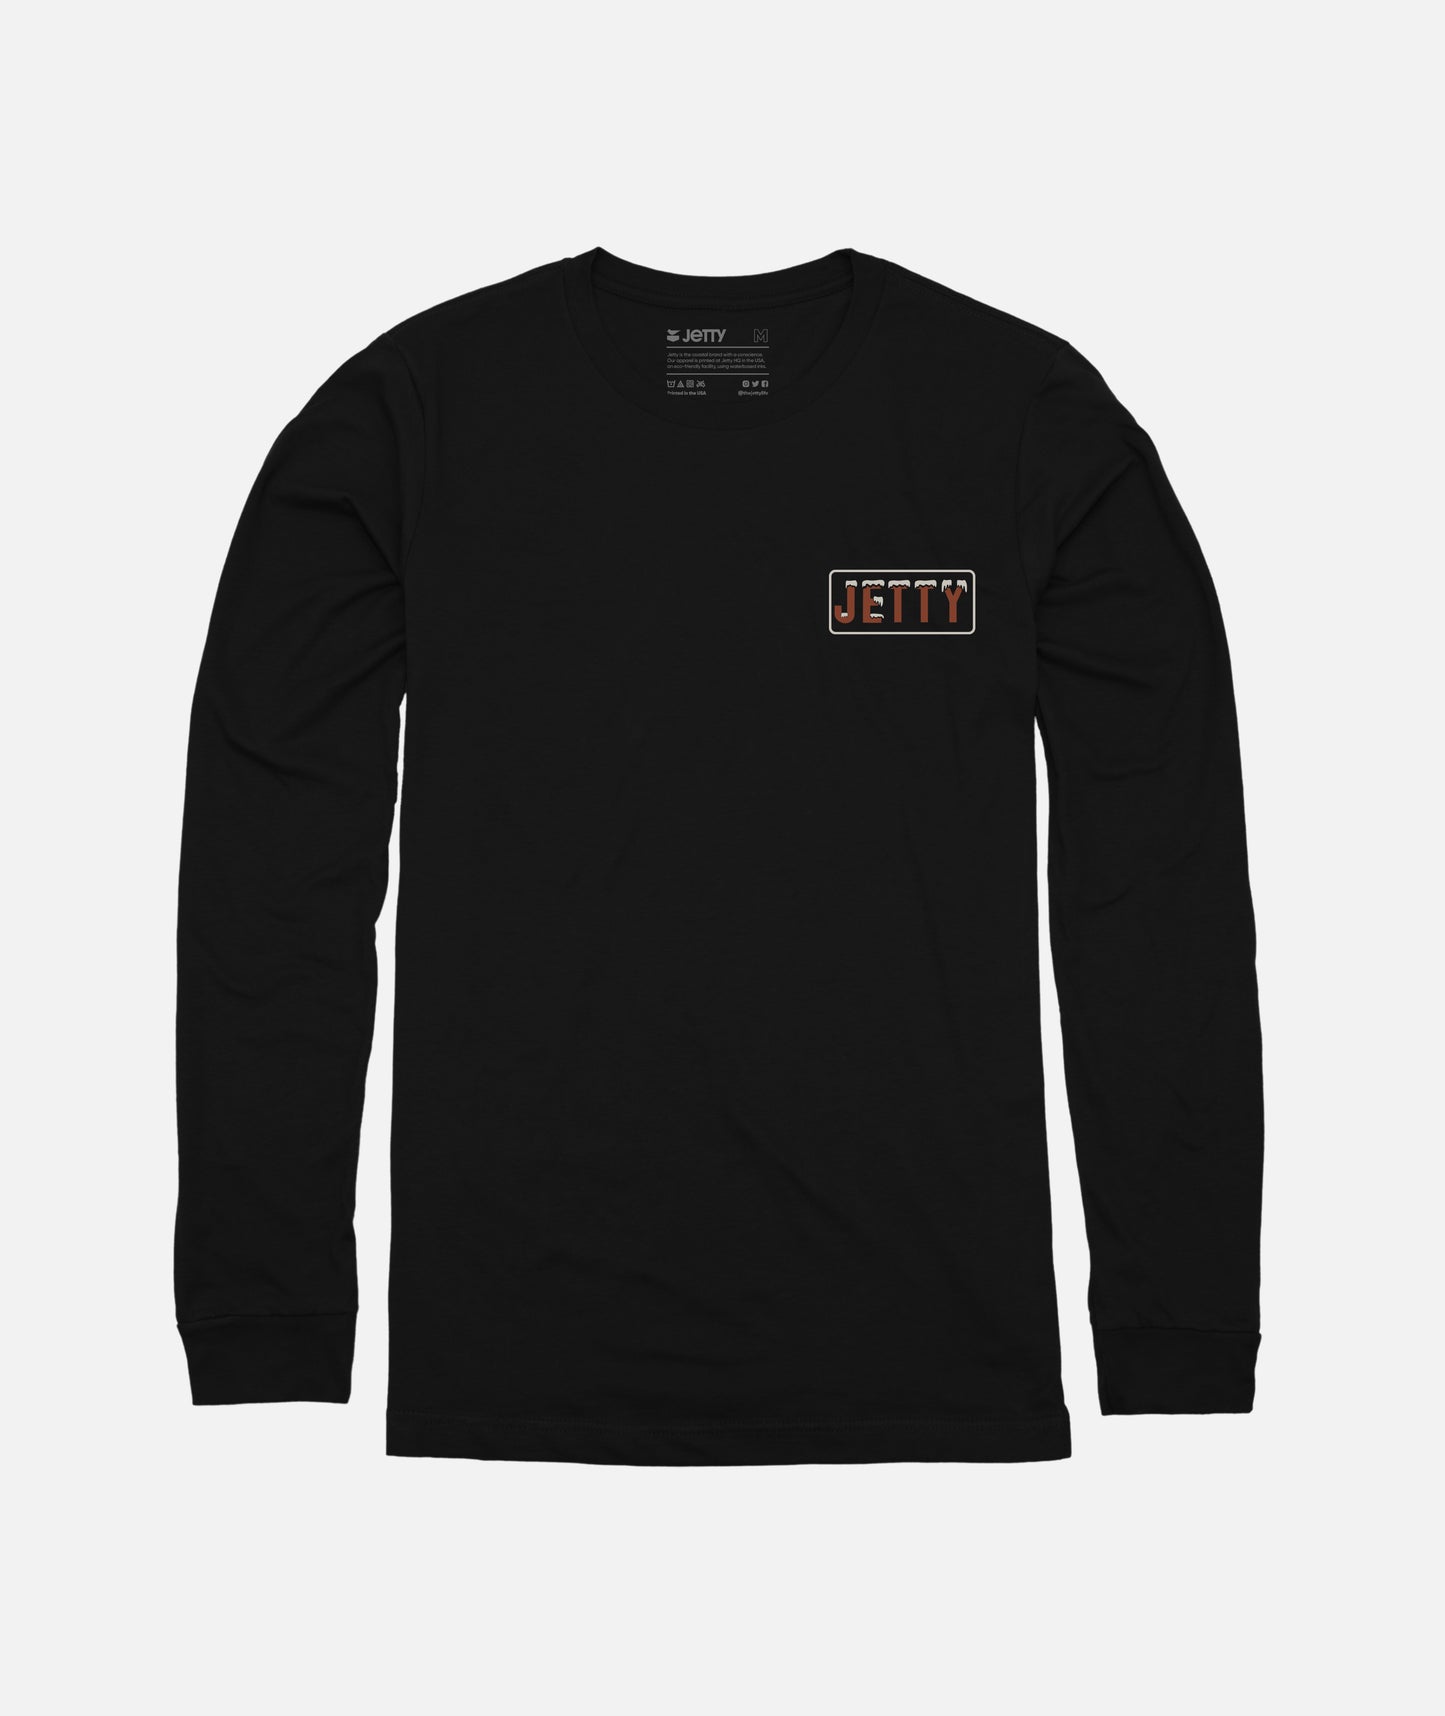 Cold Water Long Sleeve - Black